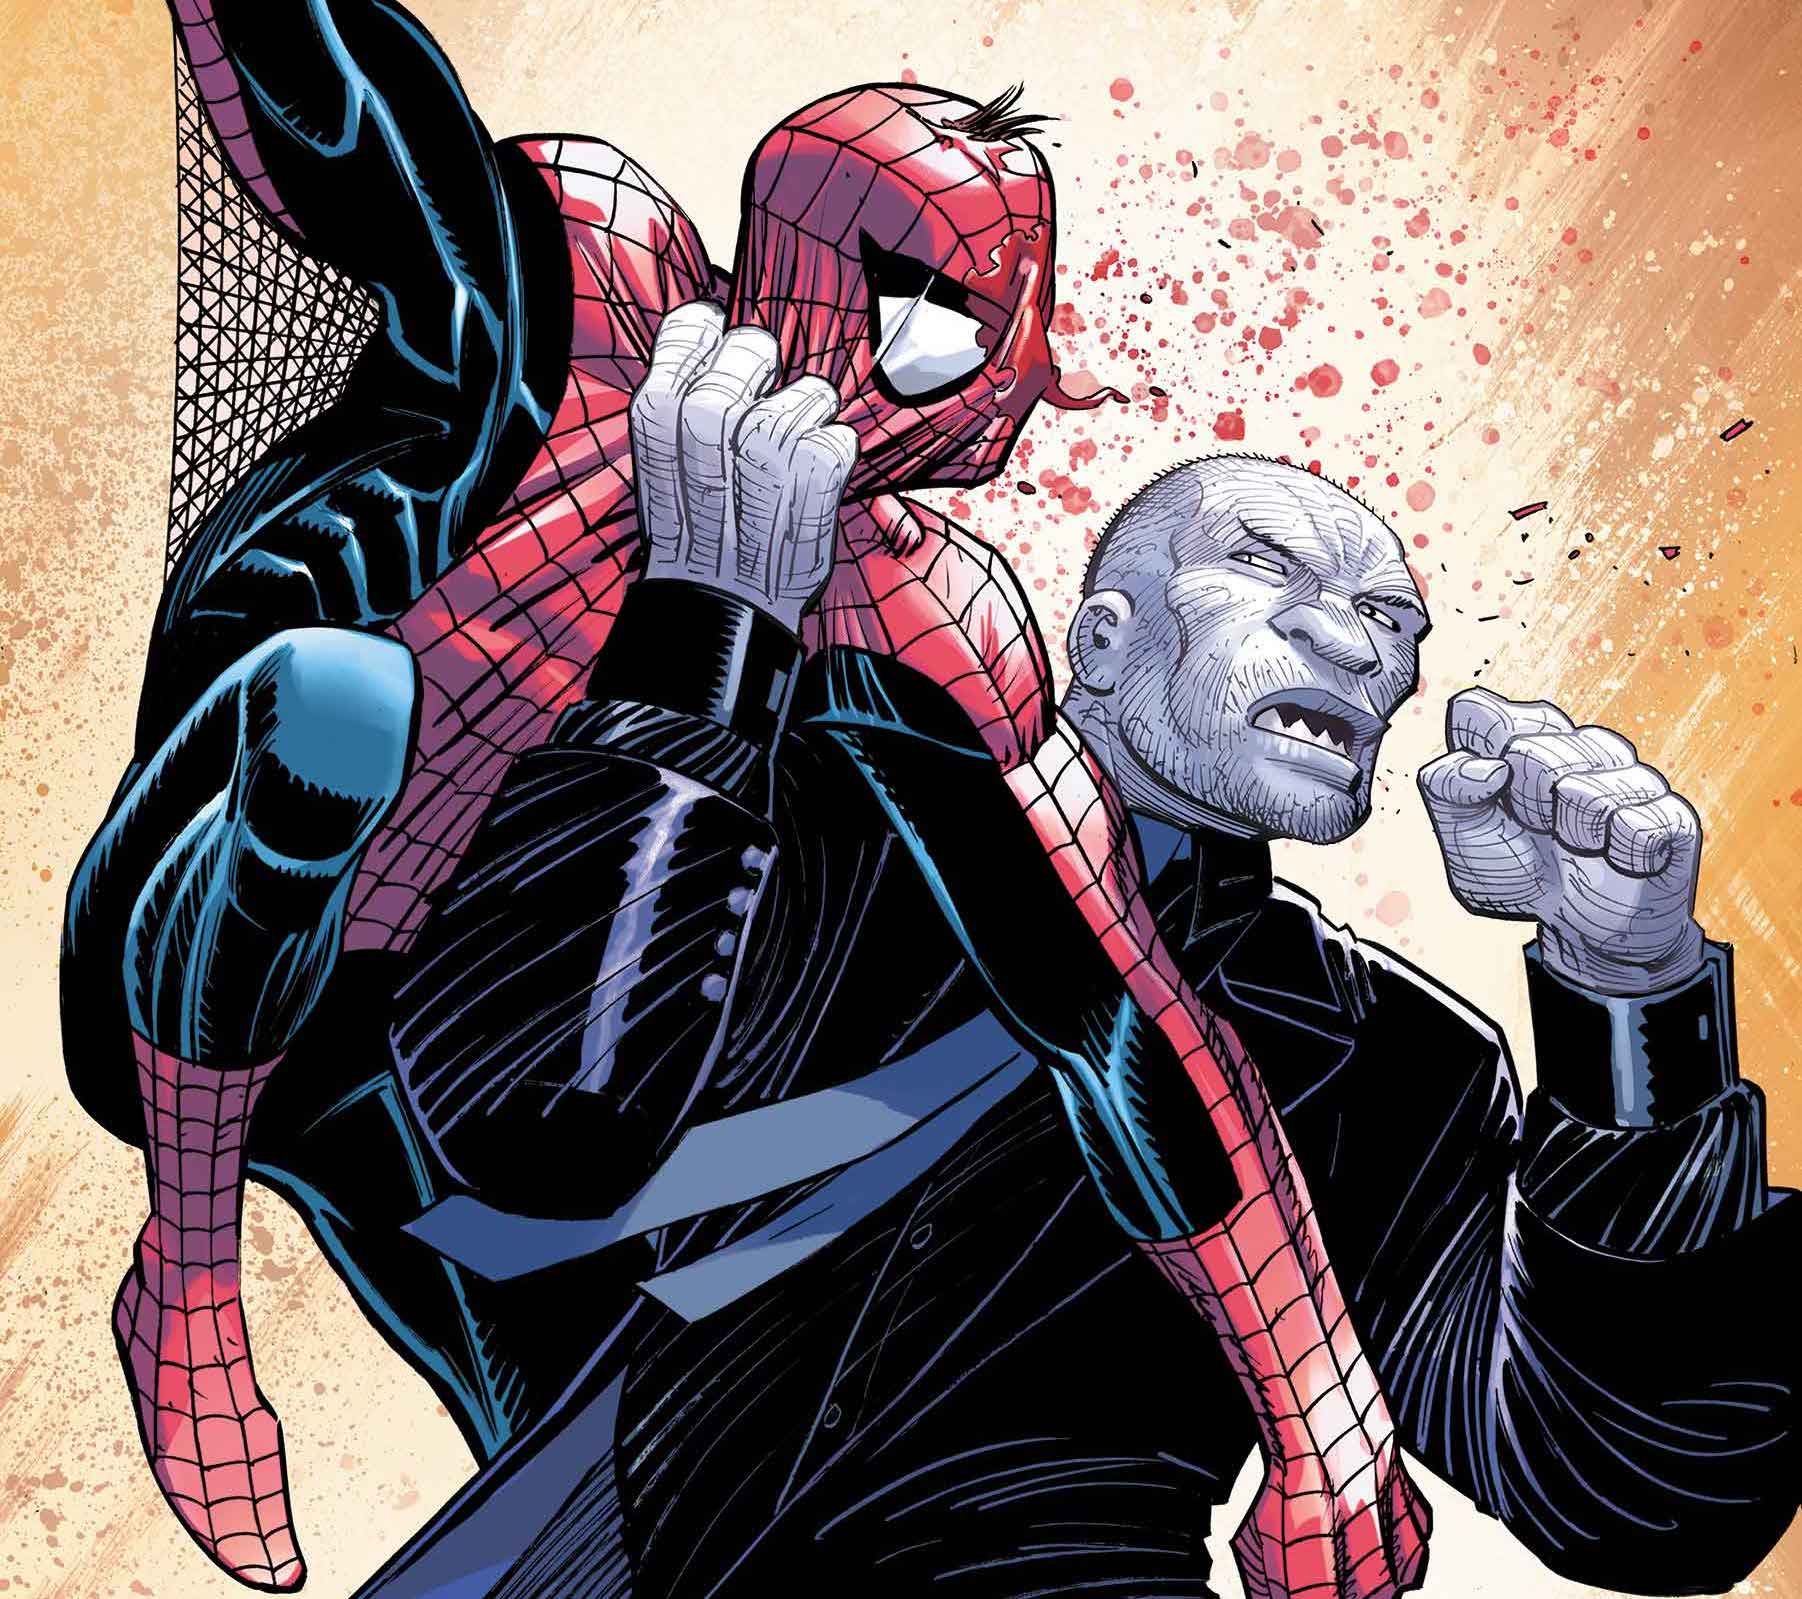 'Amazing Spider-Man' #5 forces Peter to use his wits or his fists